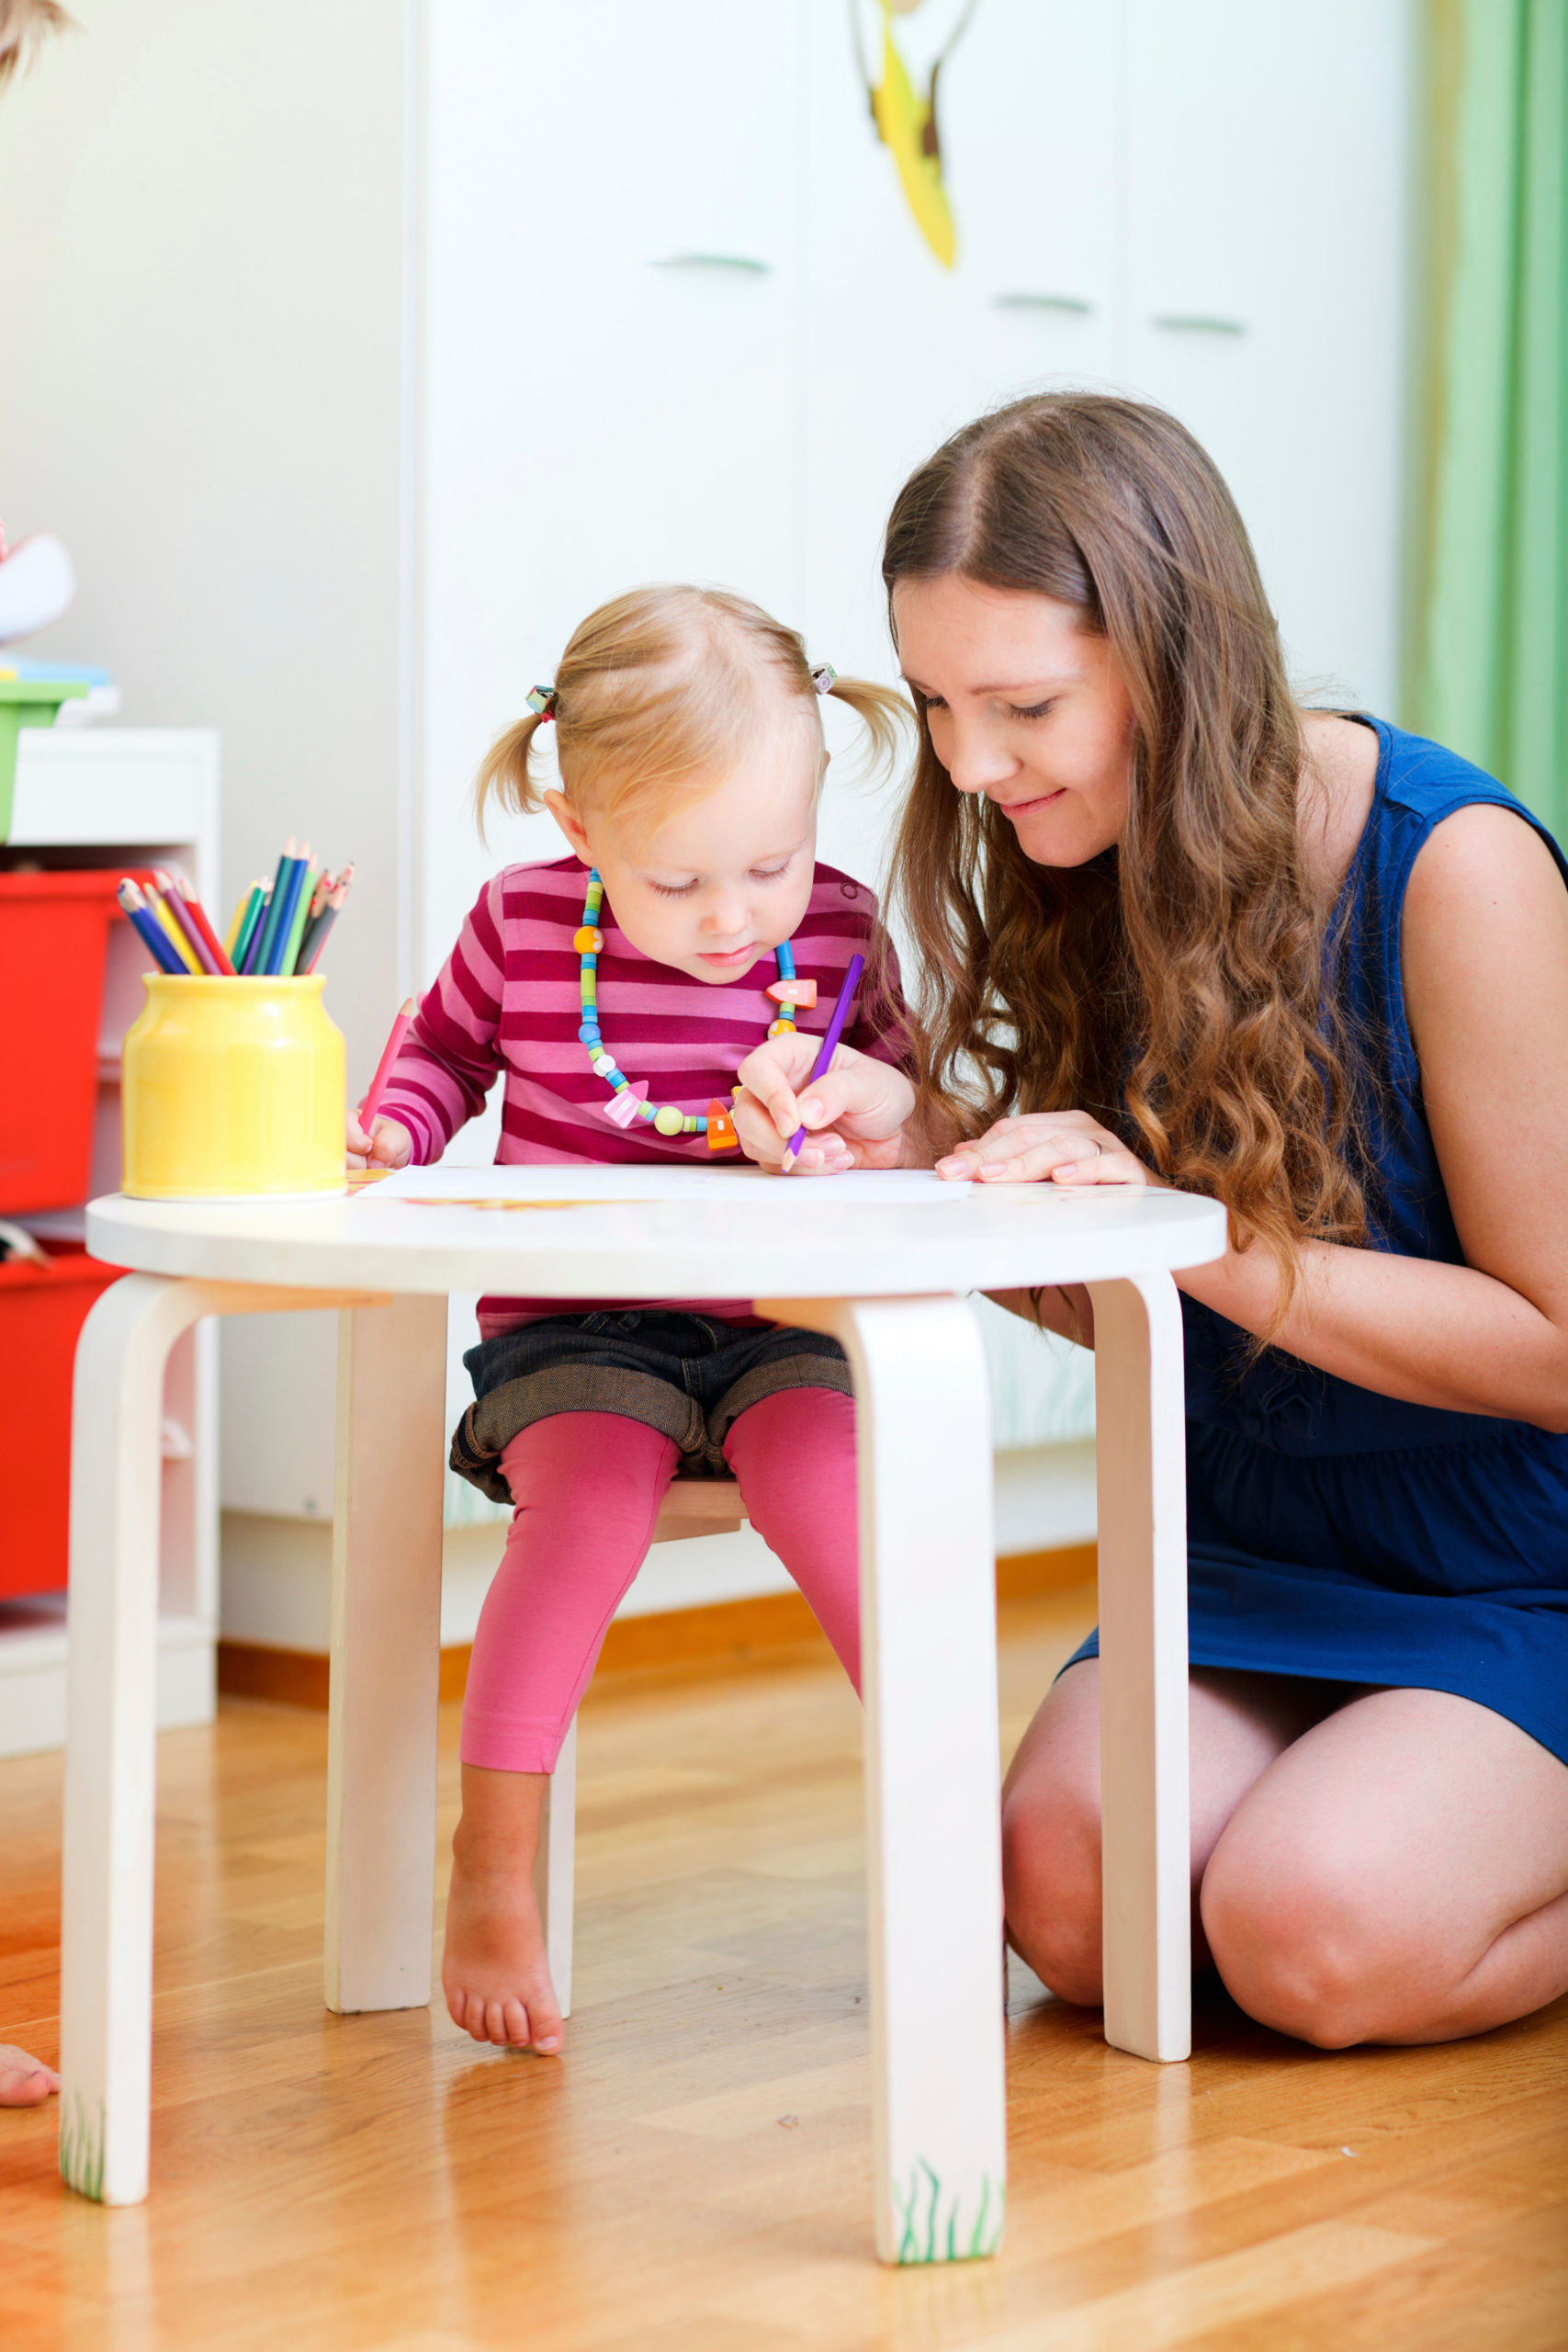 The Live-in Carer Guide: What is a Live-in Nanny vs Au Pair?